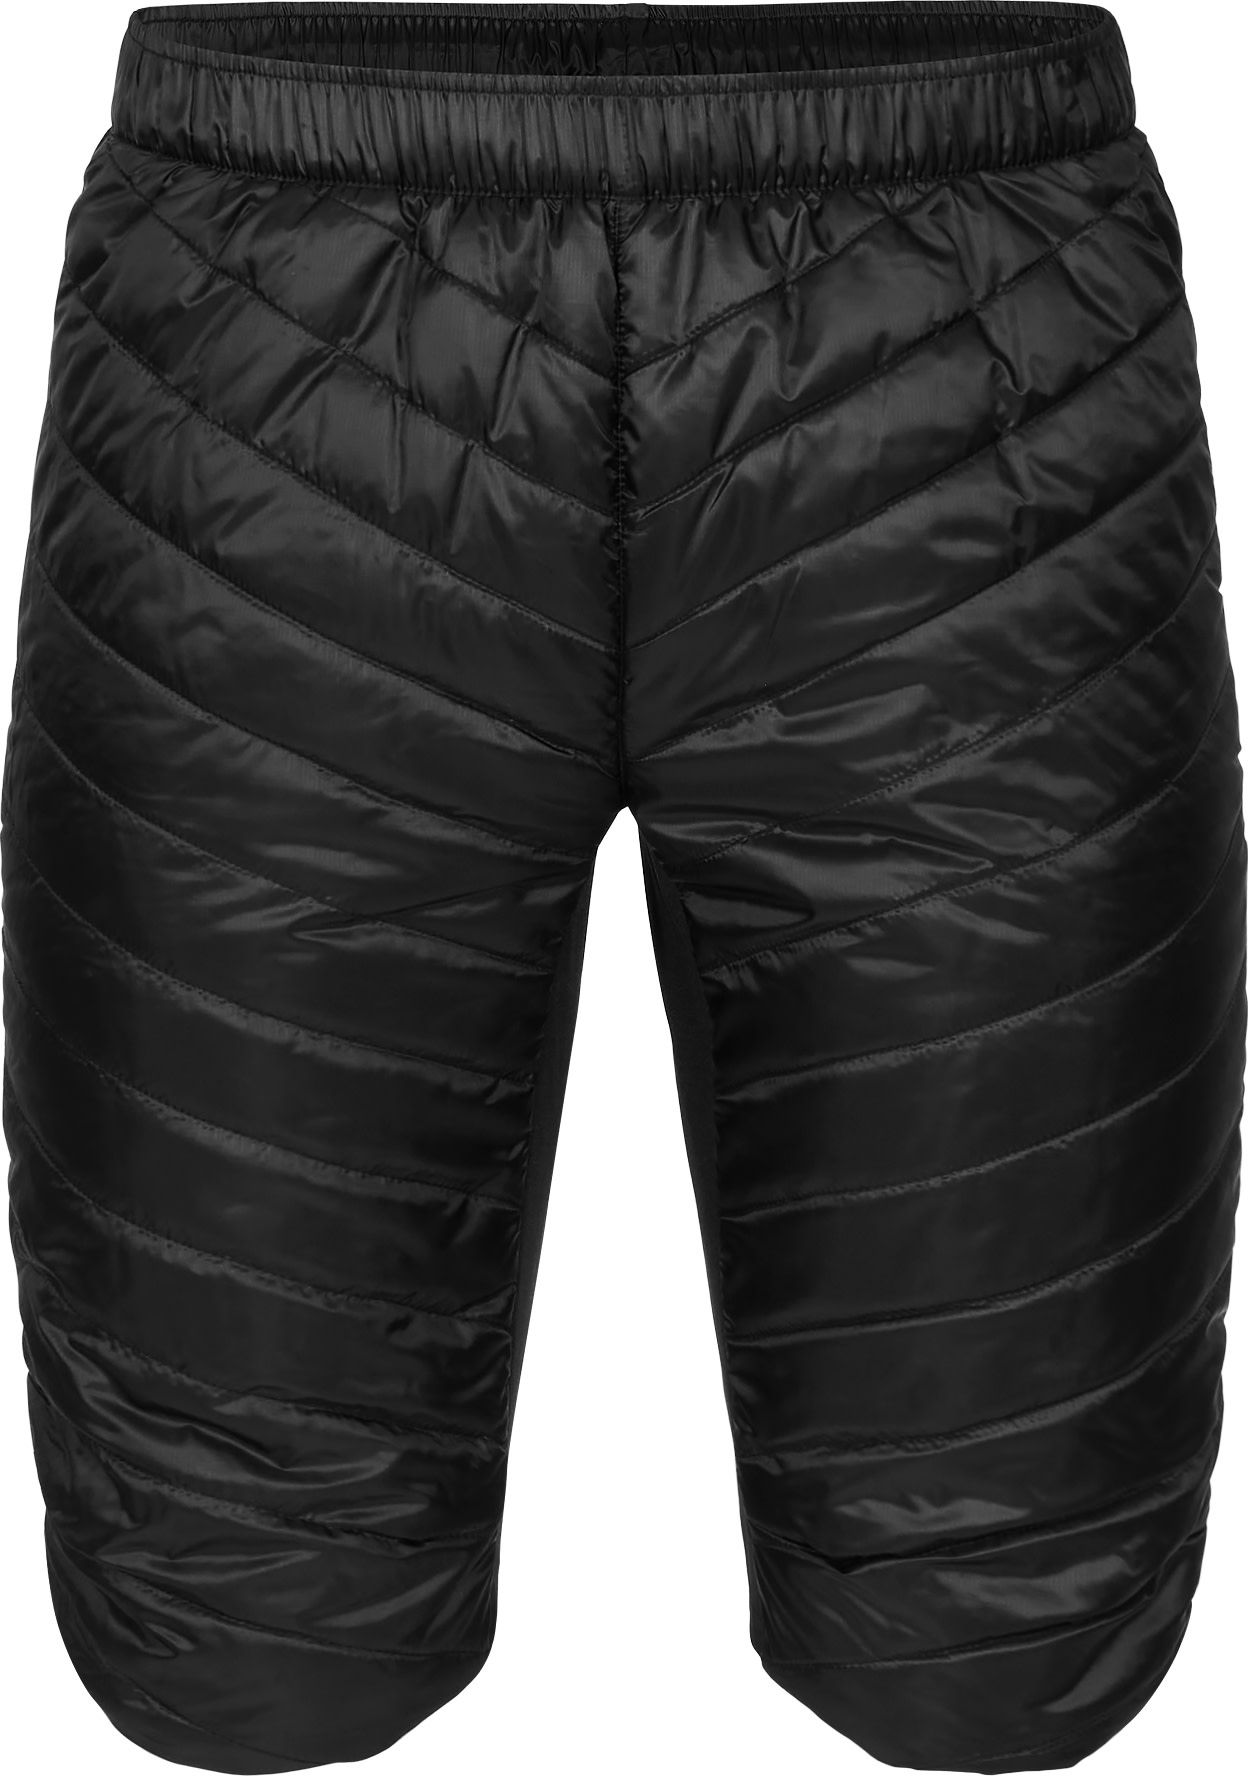 Black Padded Over Short Stretch Stretch Black beauty | Over Padded here Buy Short Men\'s beauty | Men\'s Outnorth